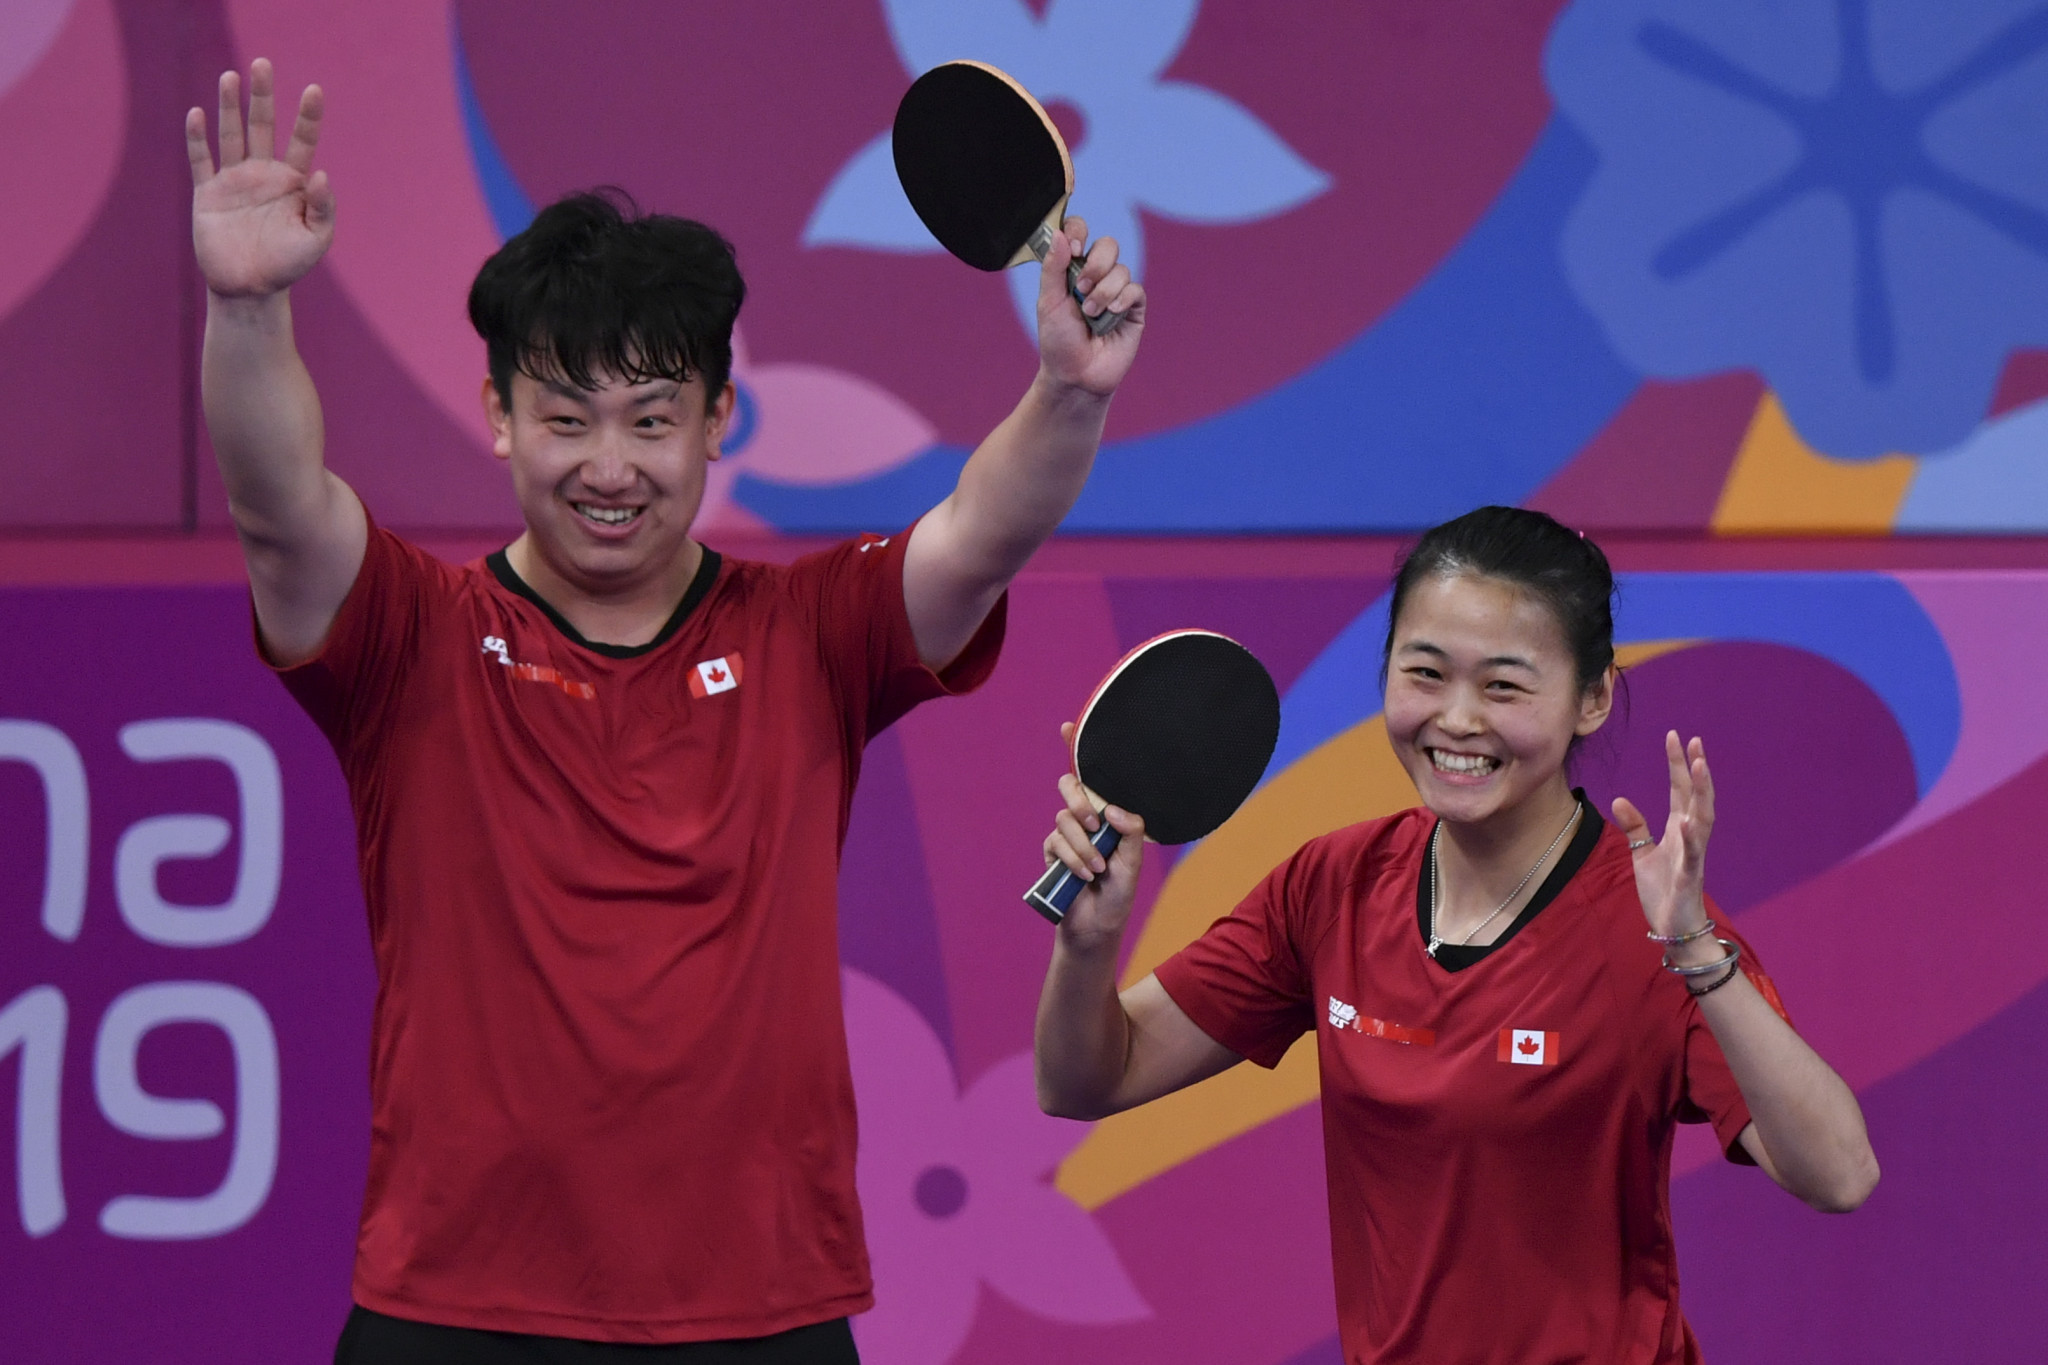 Zhang and Wang qualify for Tokyo 2020 at ITTF North American Olympic qualifiers